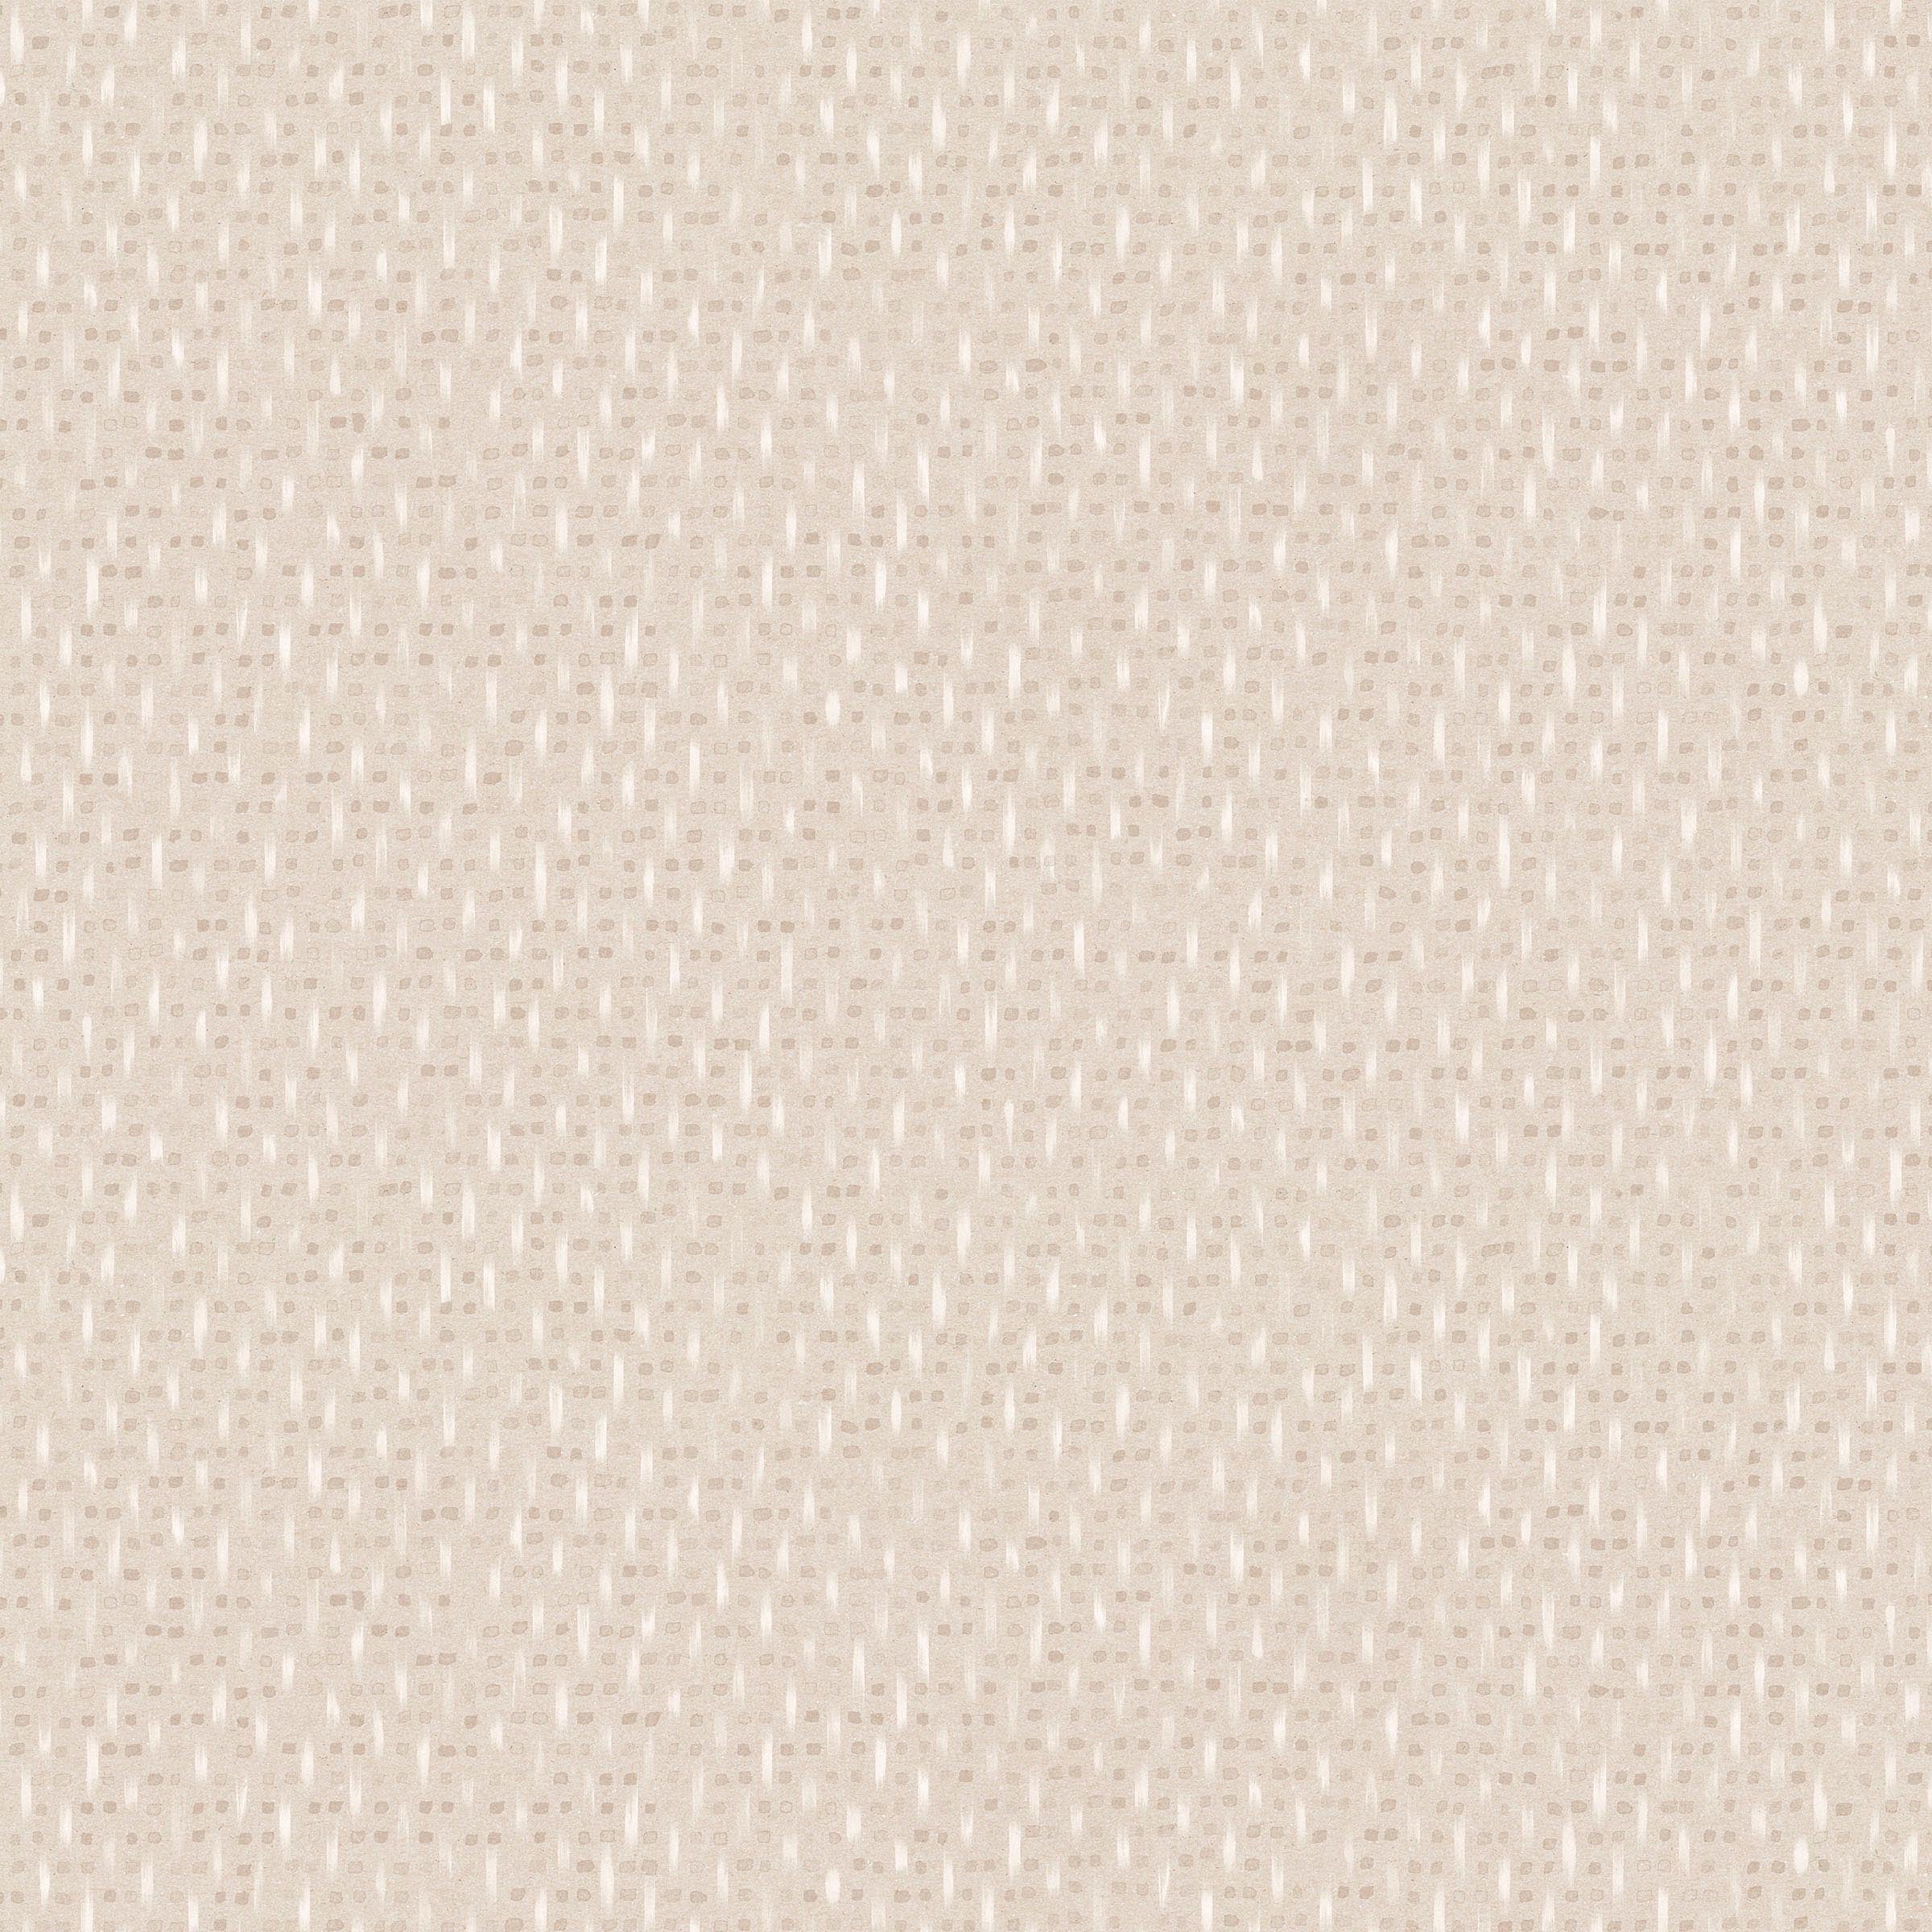 Detail of fabric in a small-scale dot and dash pattern in shades of cream and white on a cream field.